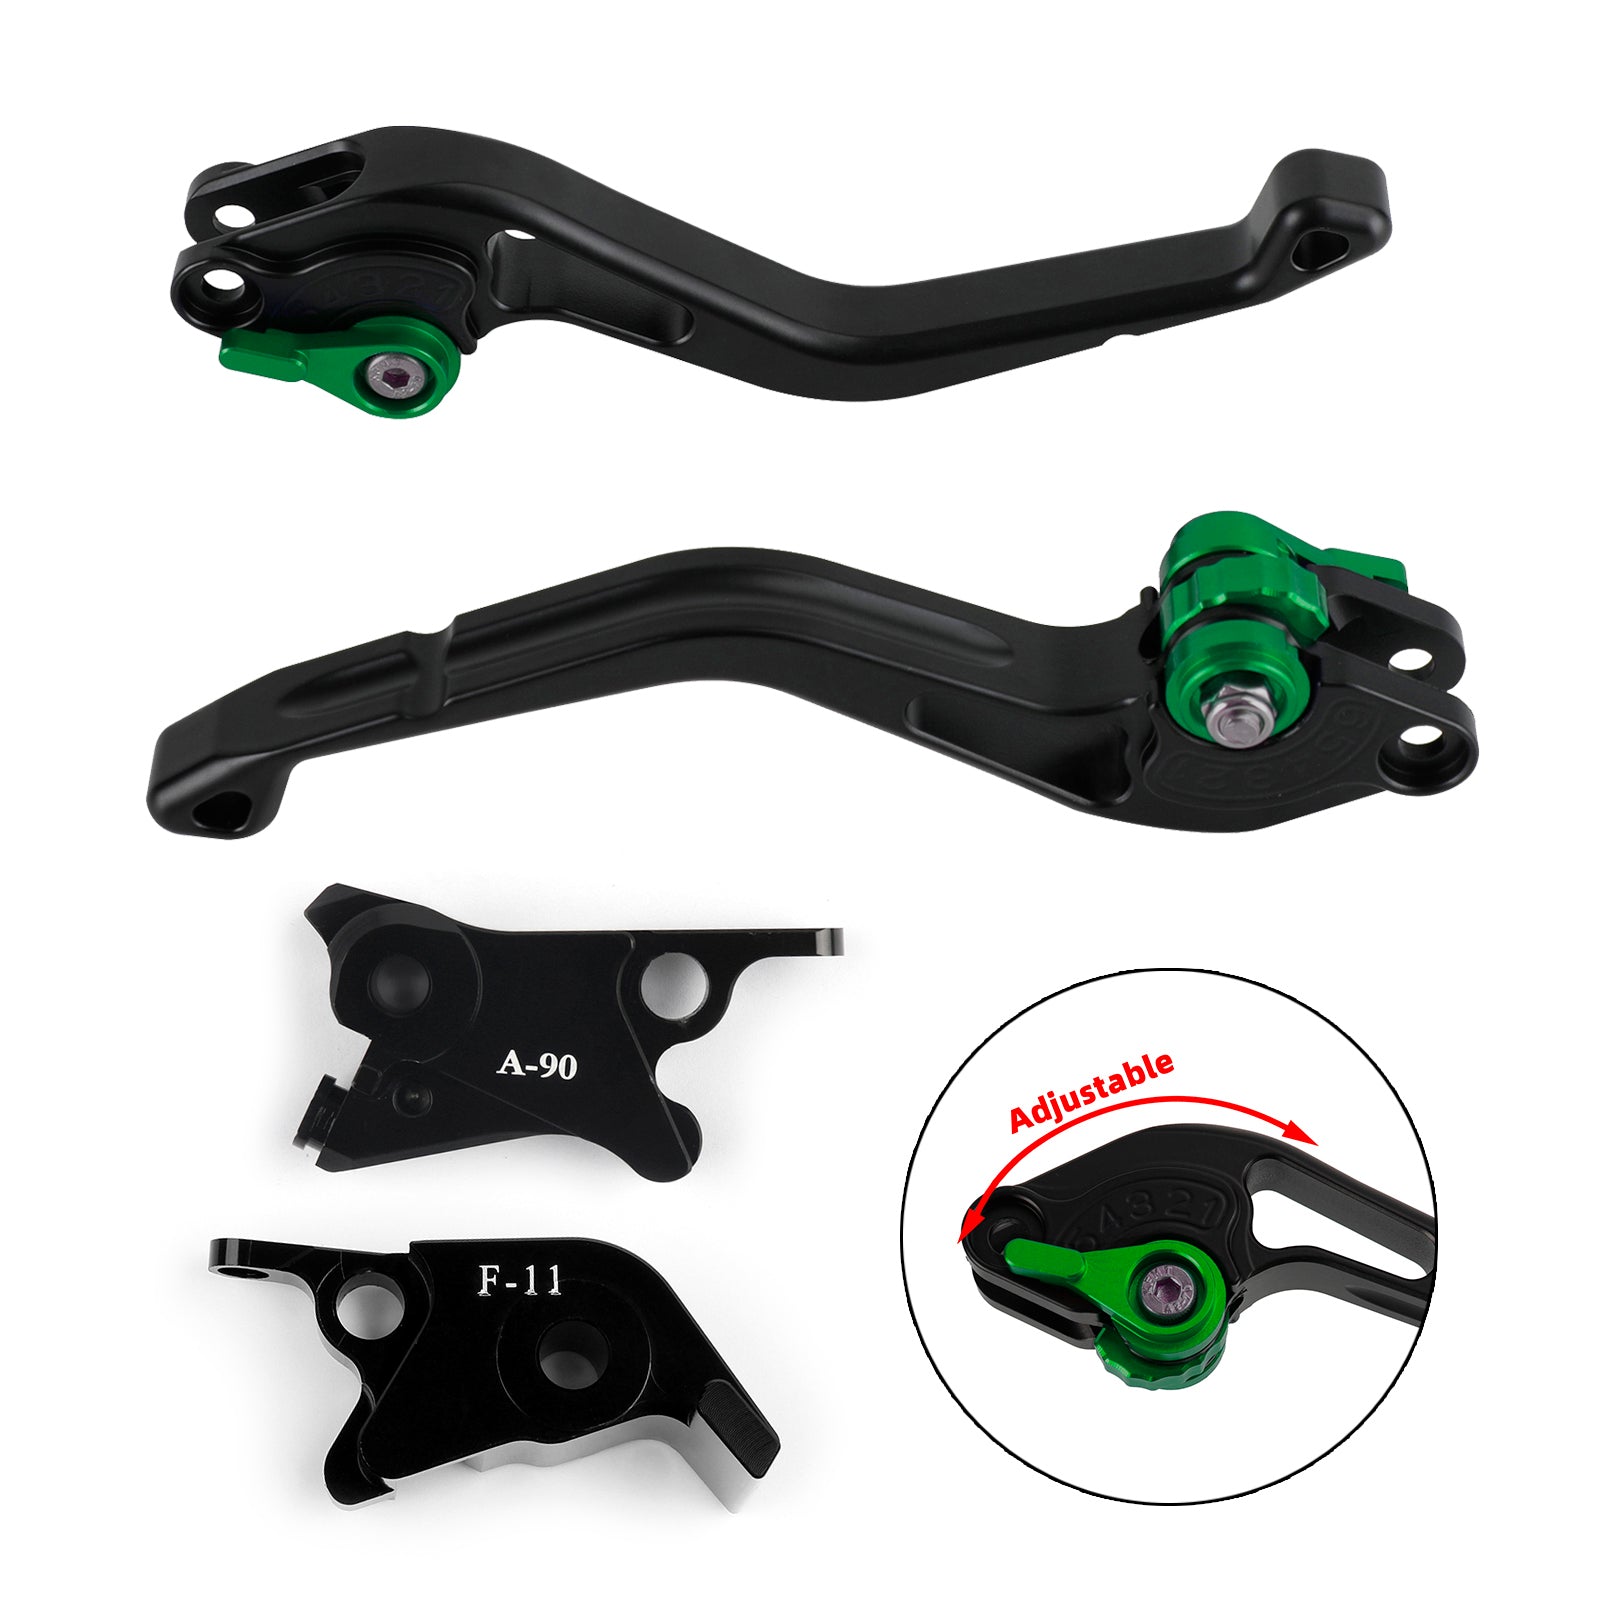 NEW Short Clutch Brake Lever fit for 690 R 2014-2016